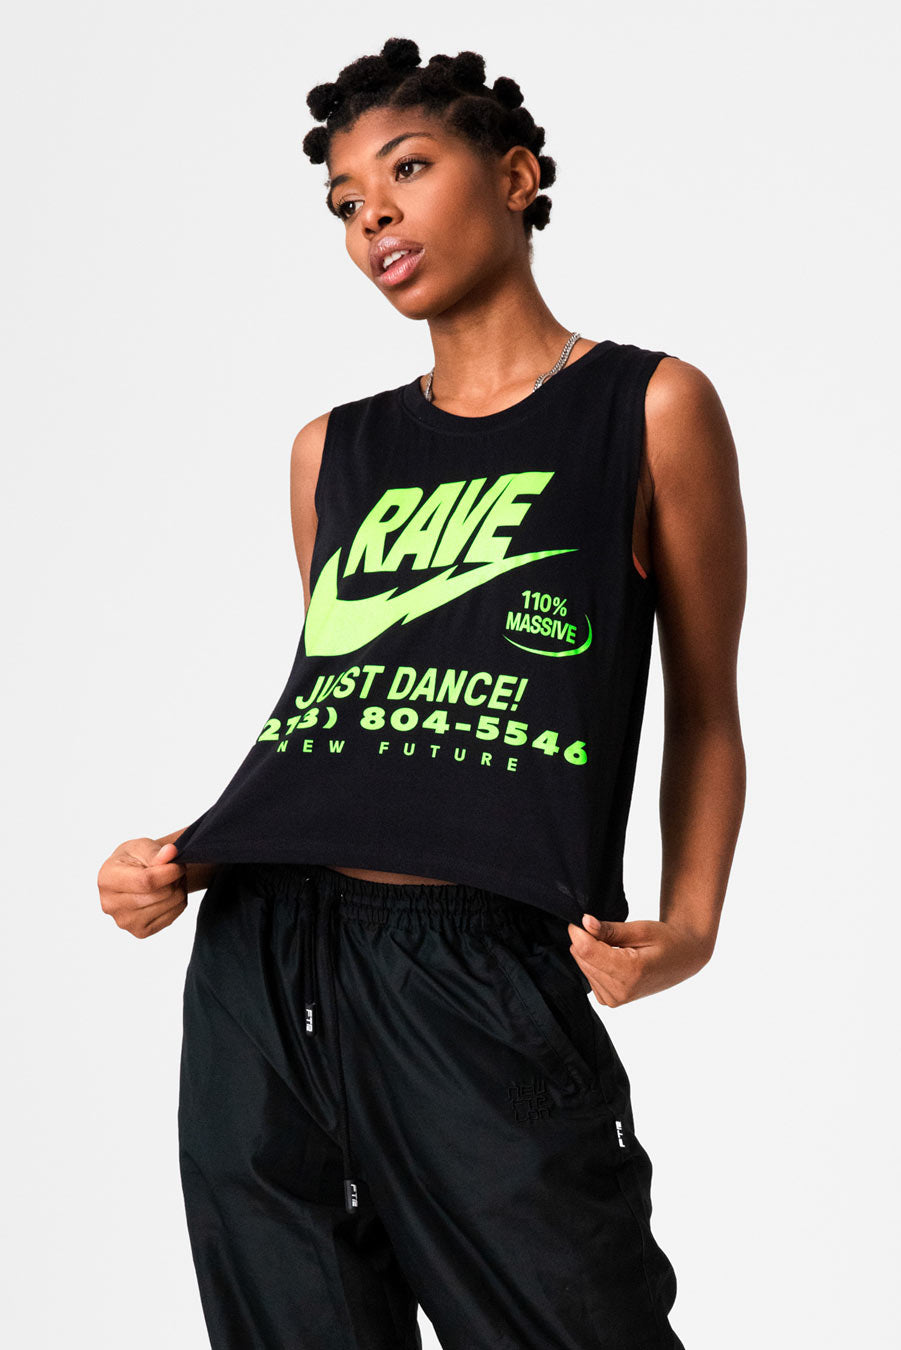 ILLEGAL RAVE (Green) - Crop Top